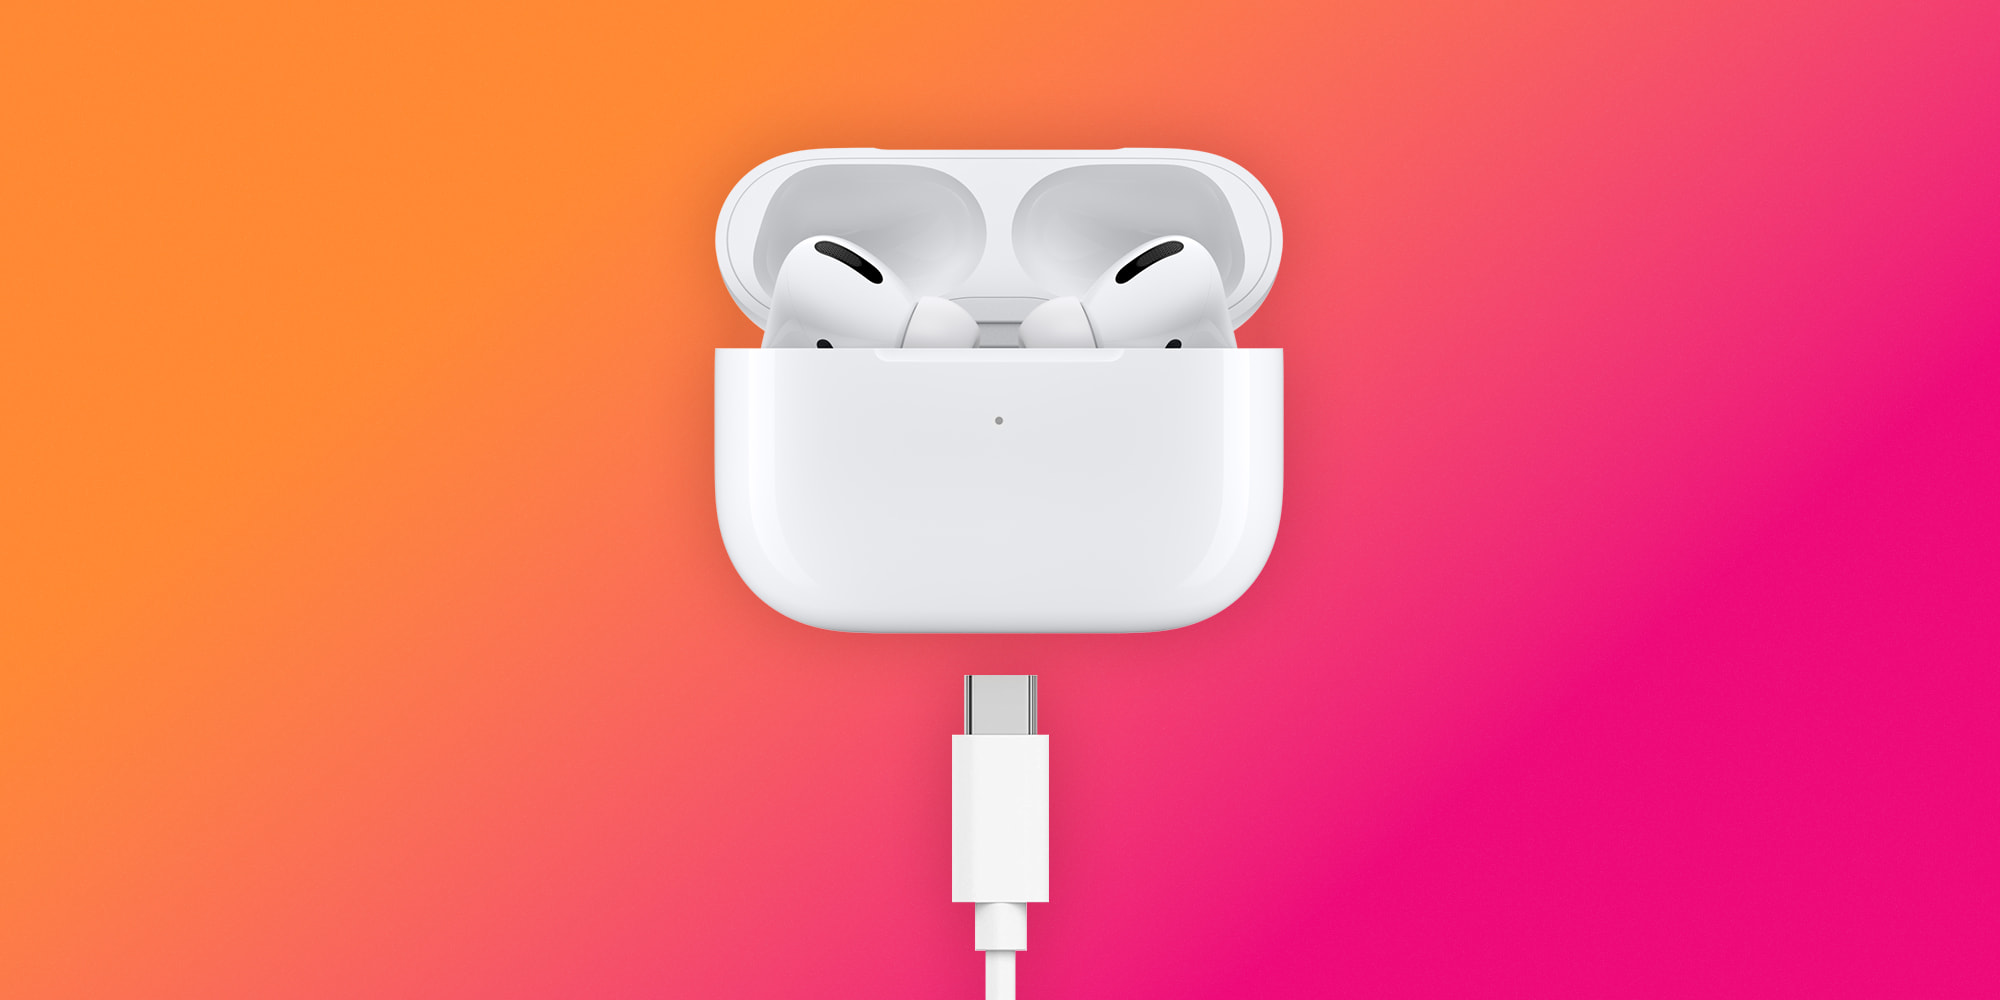 Kuo: AirPods to switch to USB C for charging alongside iPhone